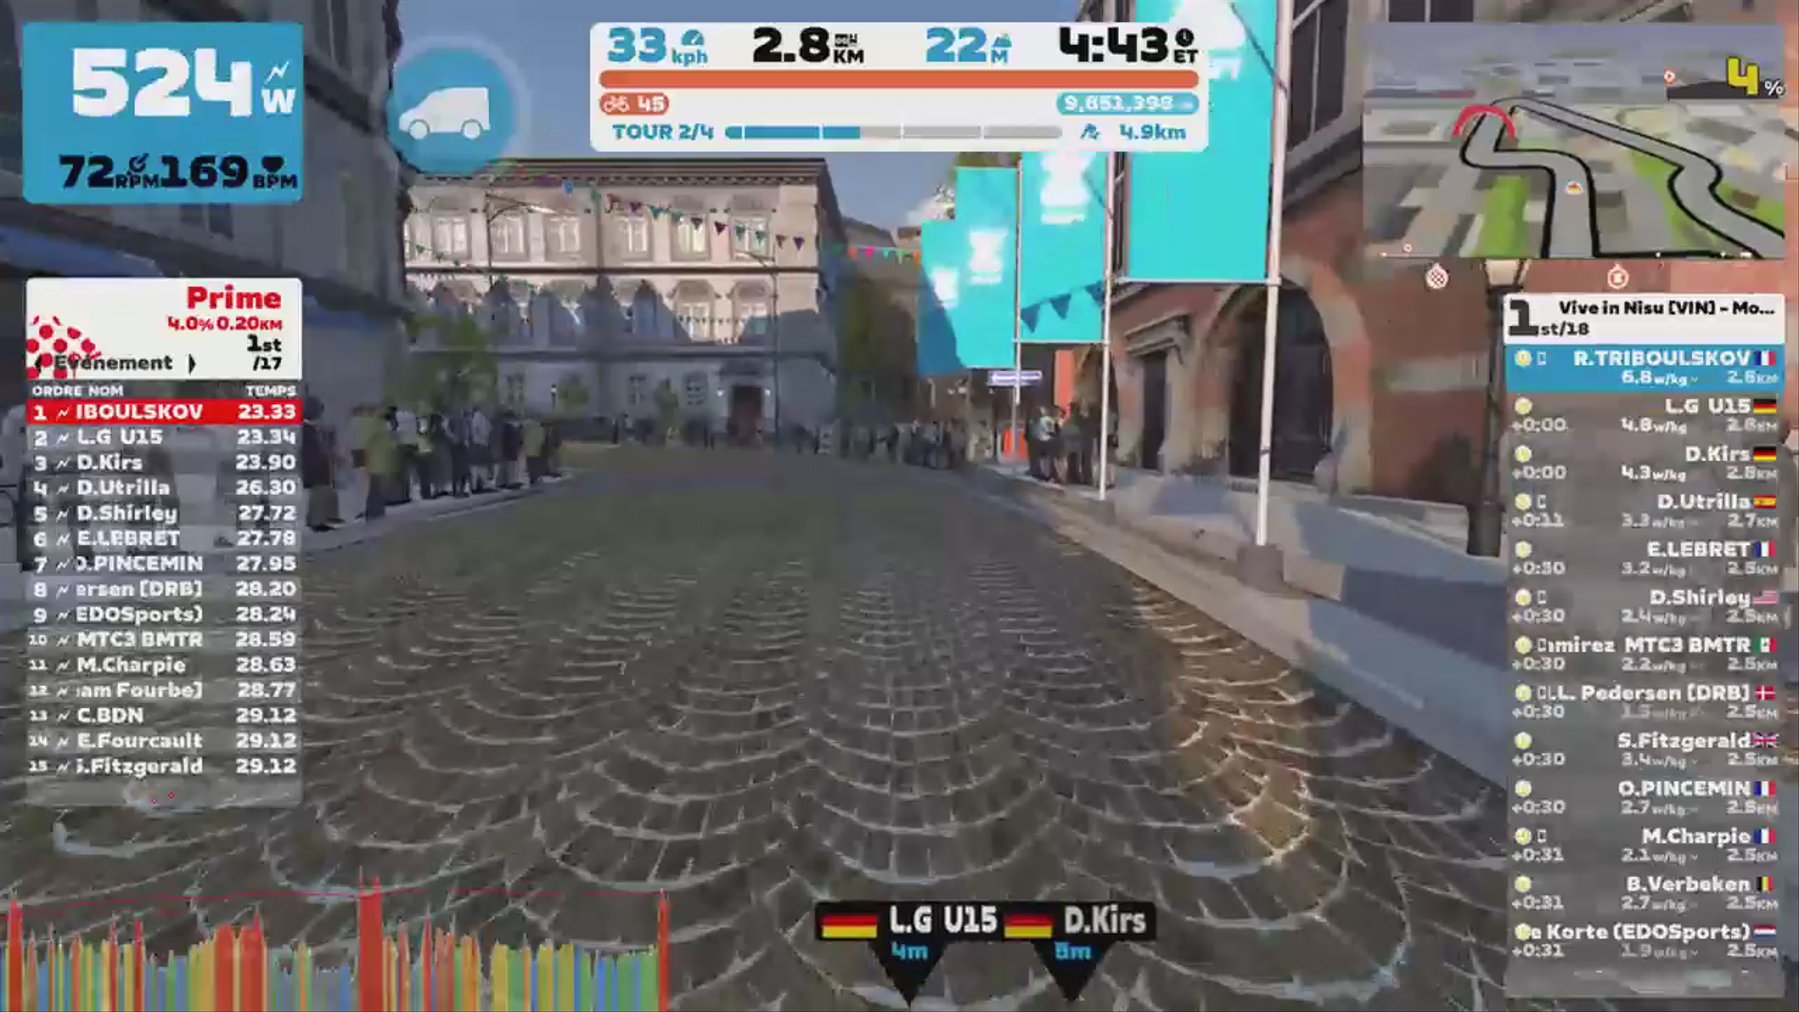 Zwift - Group Ride: Vive in Nisu [VIN] - Motion Monday (2.0 - 2.5 W/kg) (D) on Downtown Dolphin in Crit City